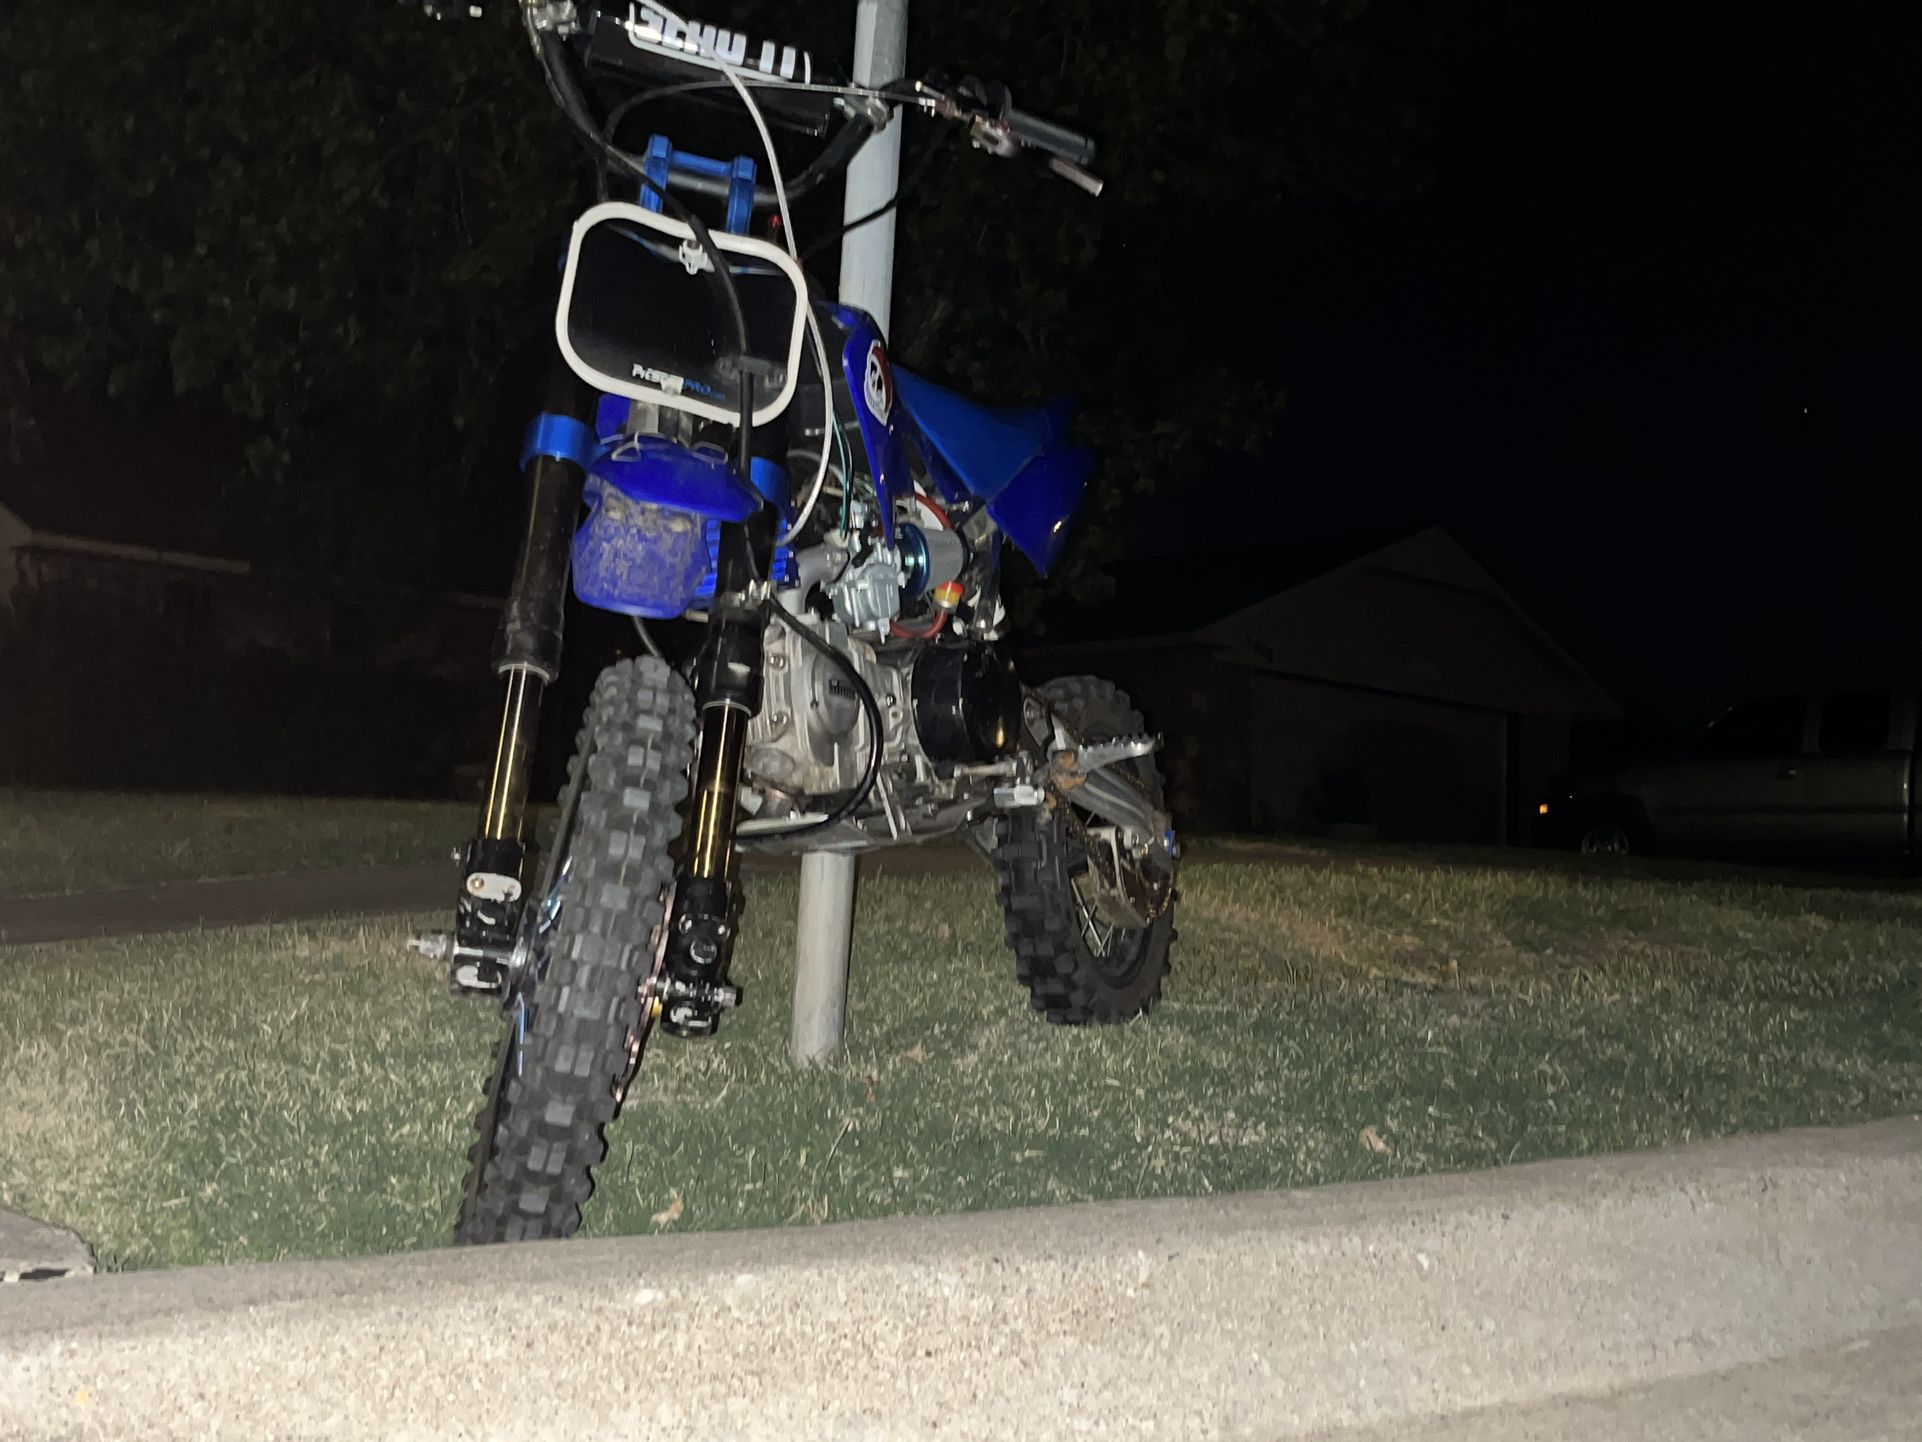 (Stolen) Dirt bike ,PLEASE IF YOU FIND IT LET ME KNOW